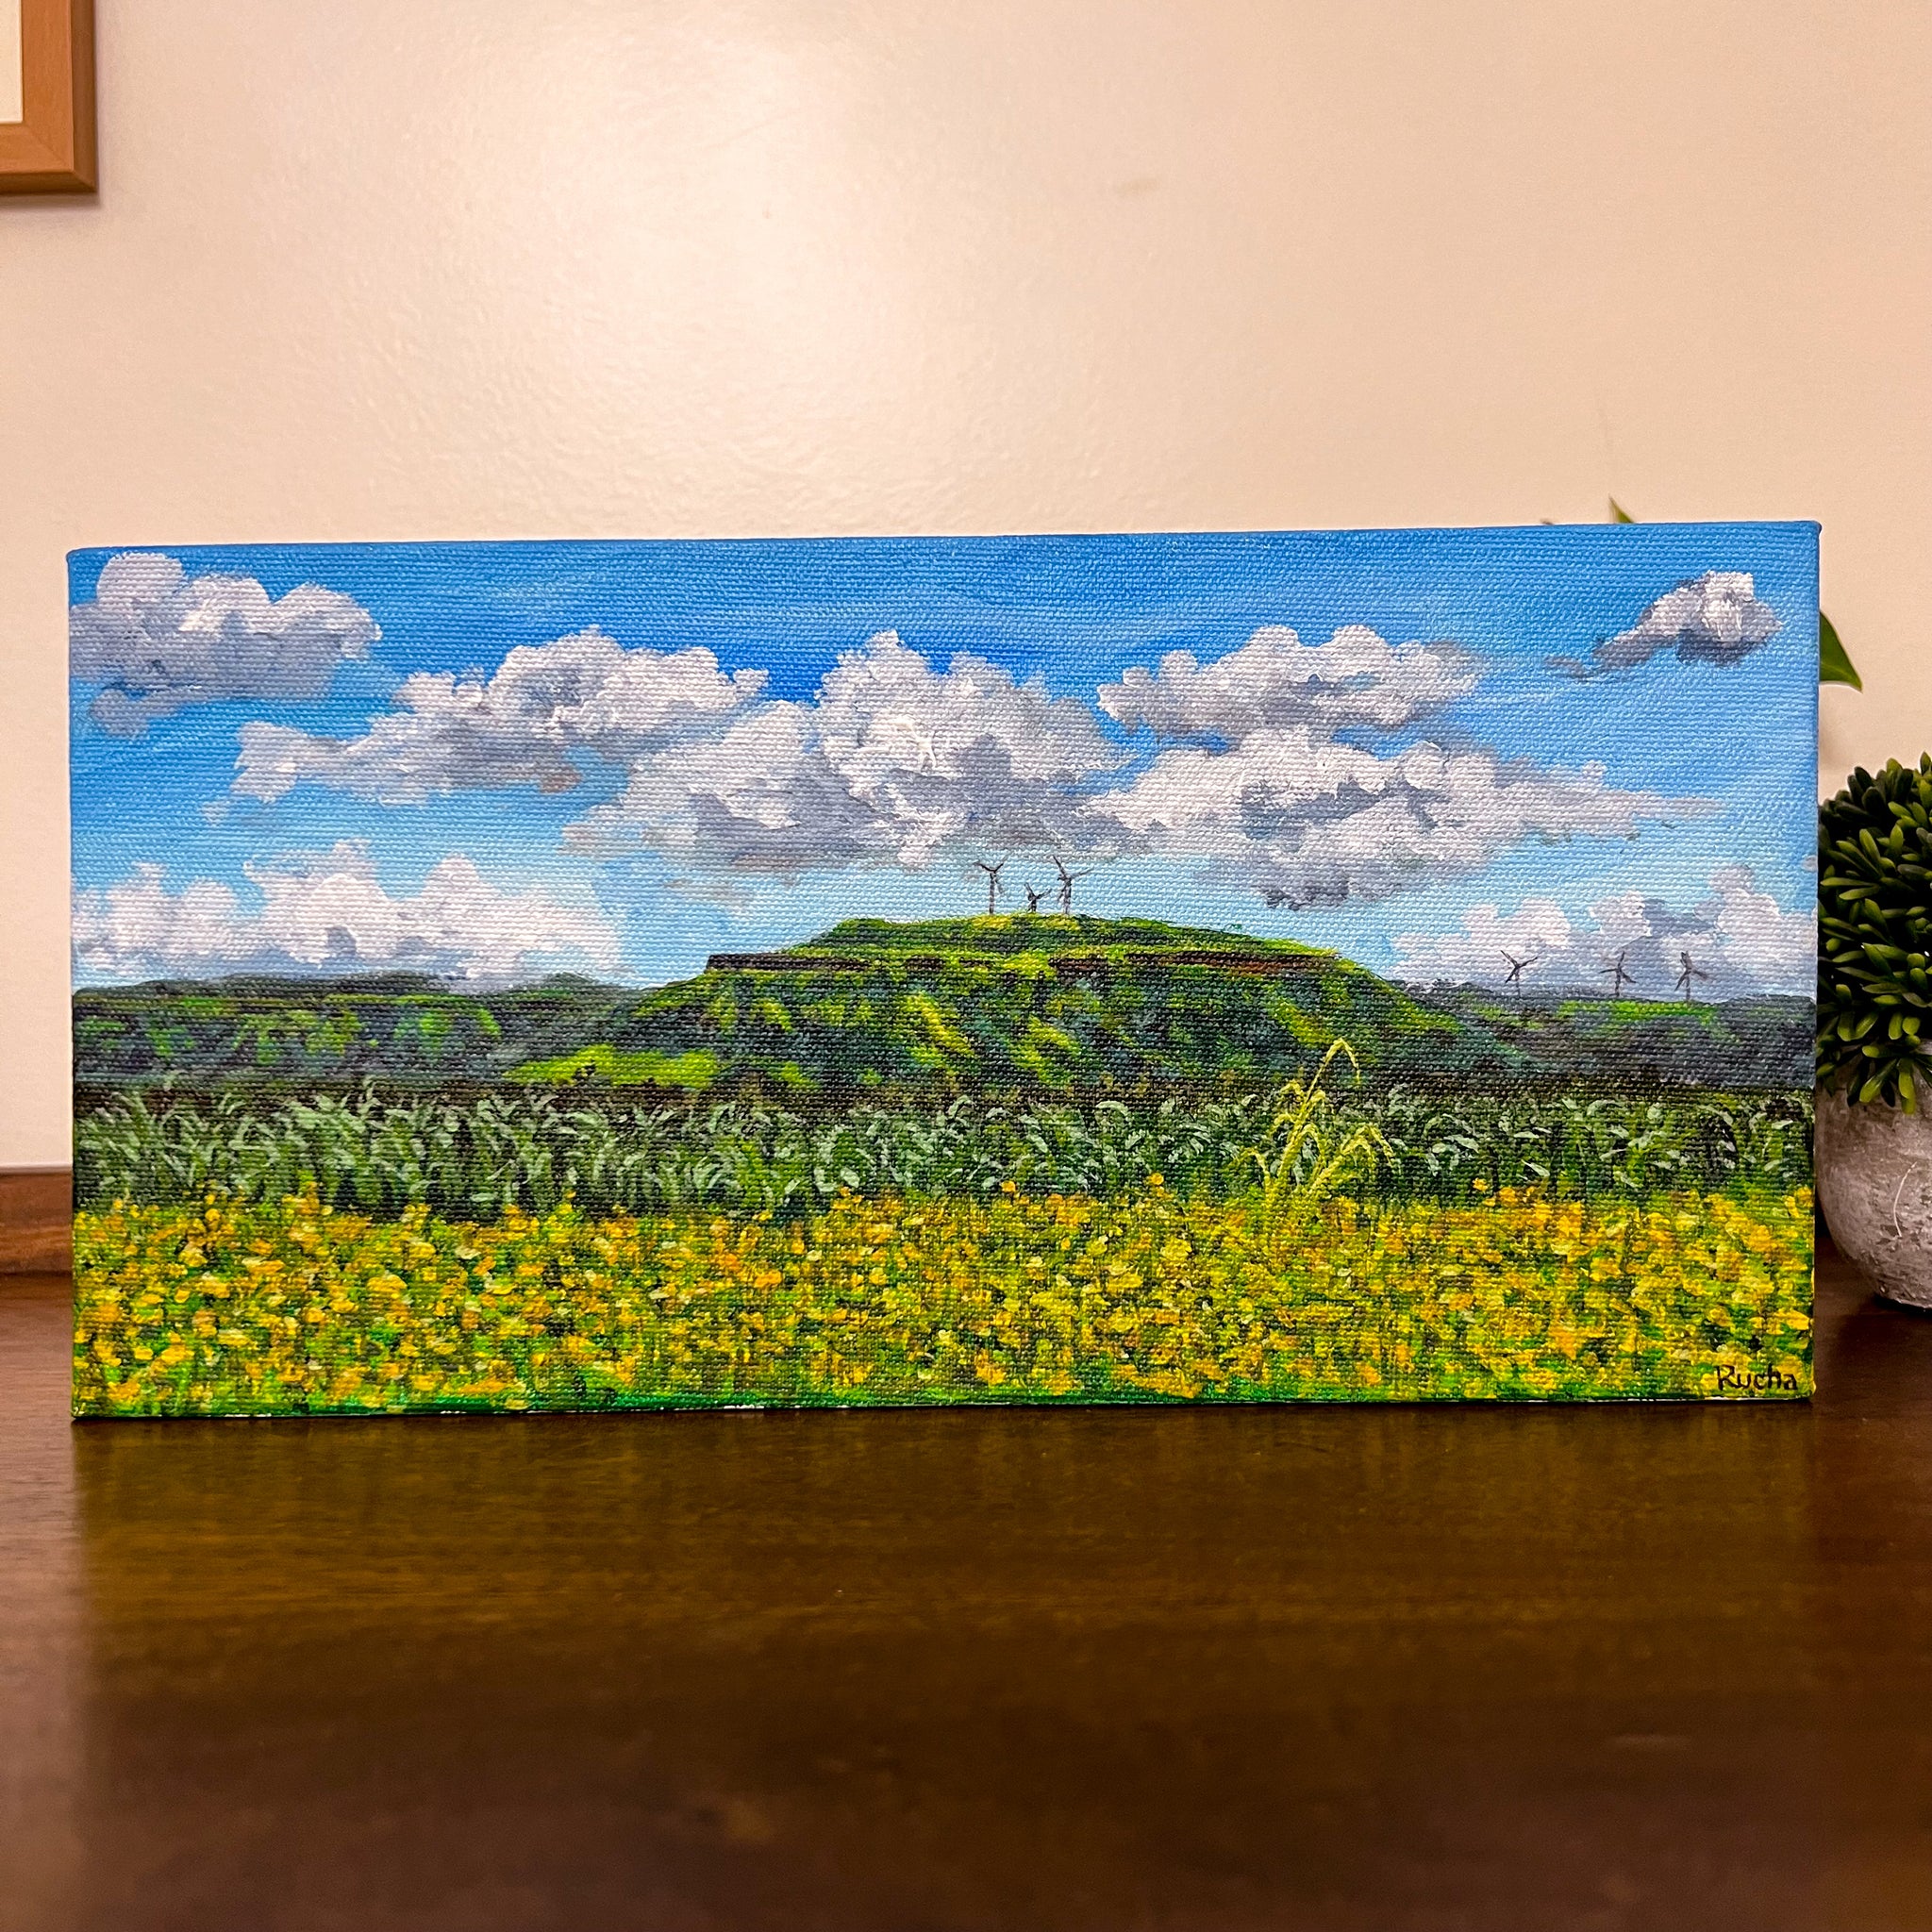 A bright day in the farm - Painting